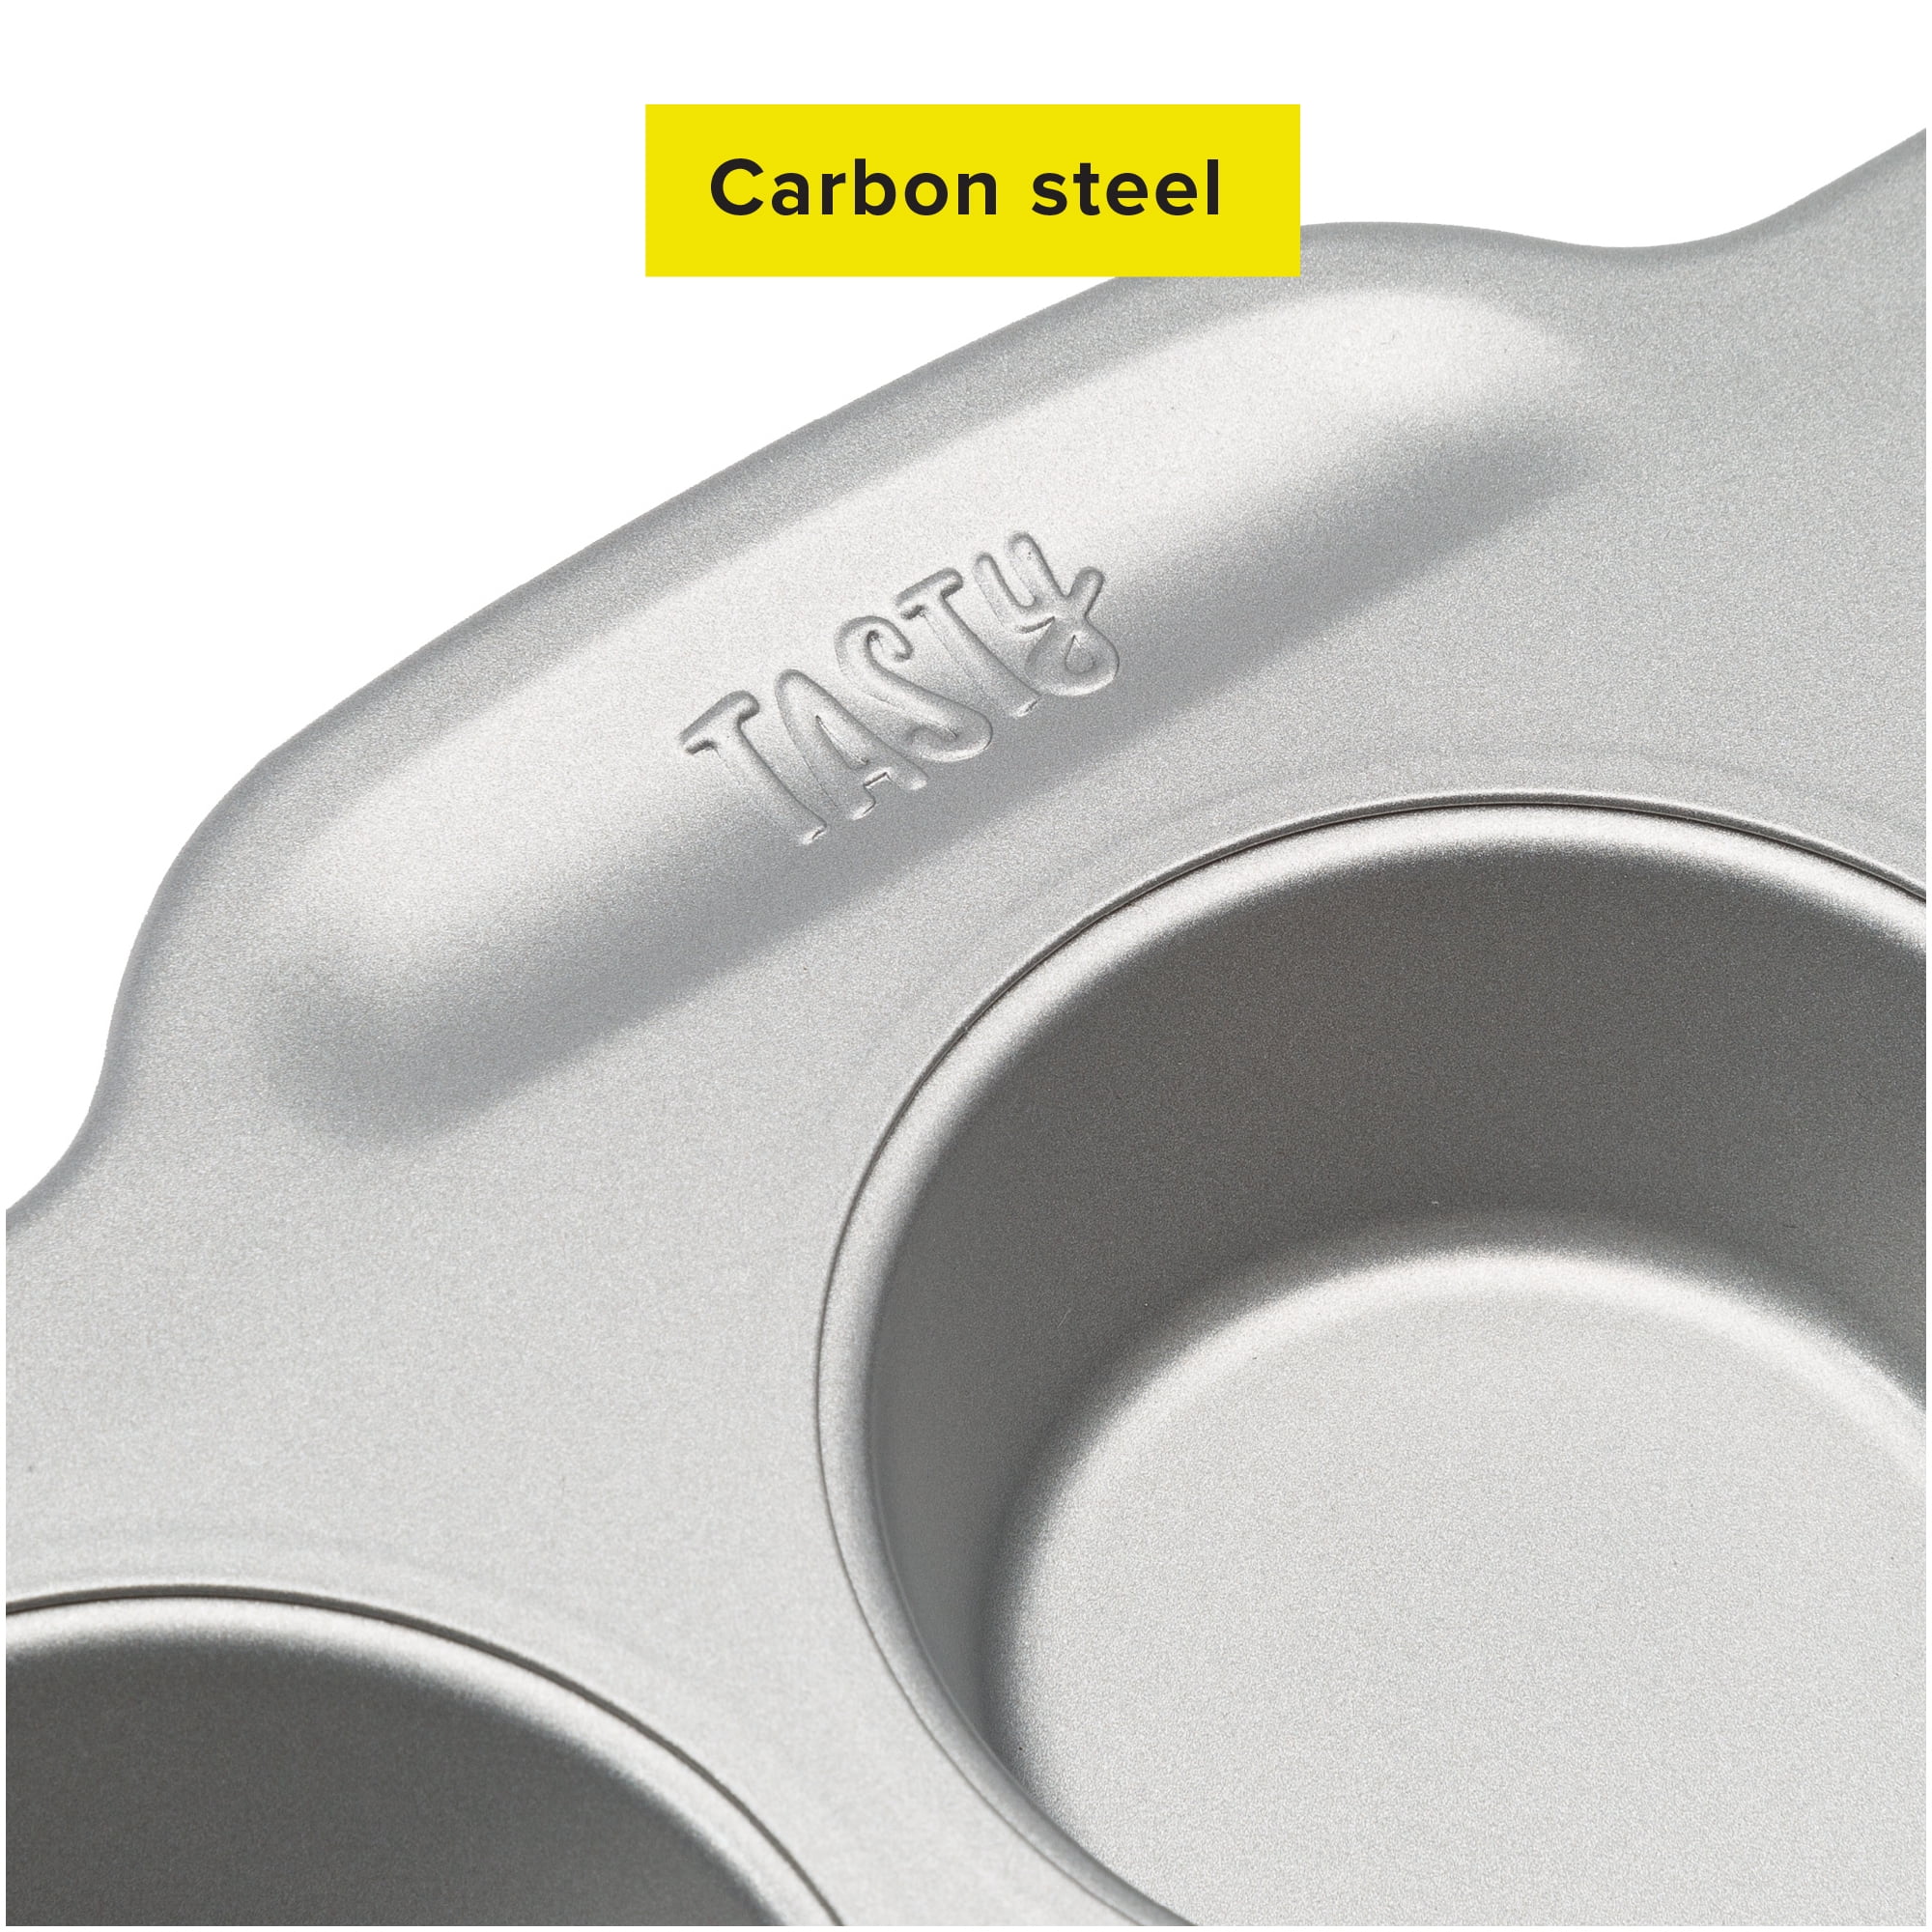 Tasty 2 Piece Carbon Steel Baking Set: 9x5 Loaf Pan and 9